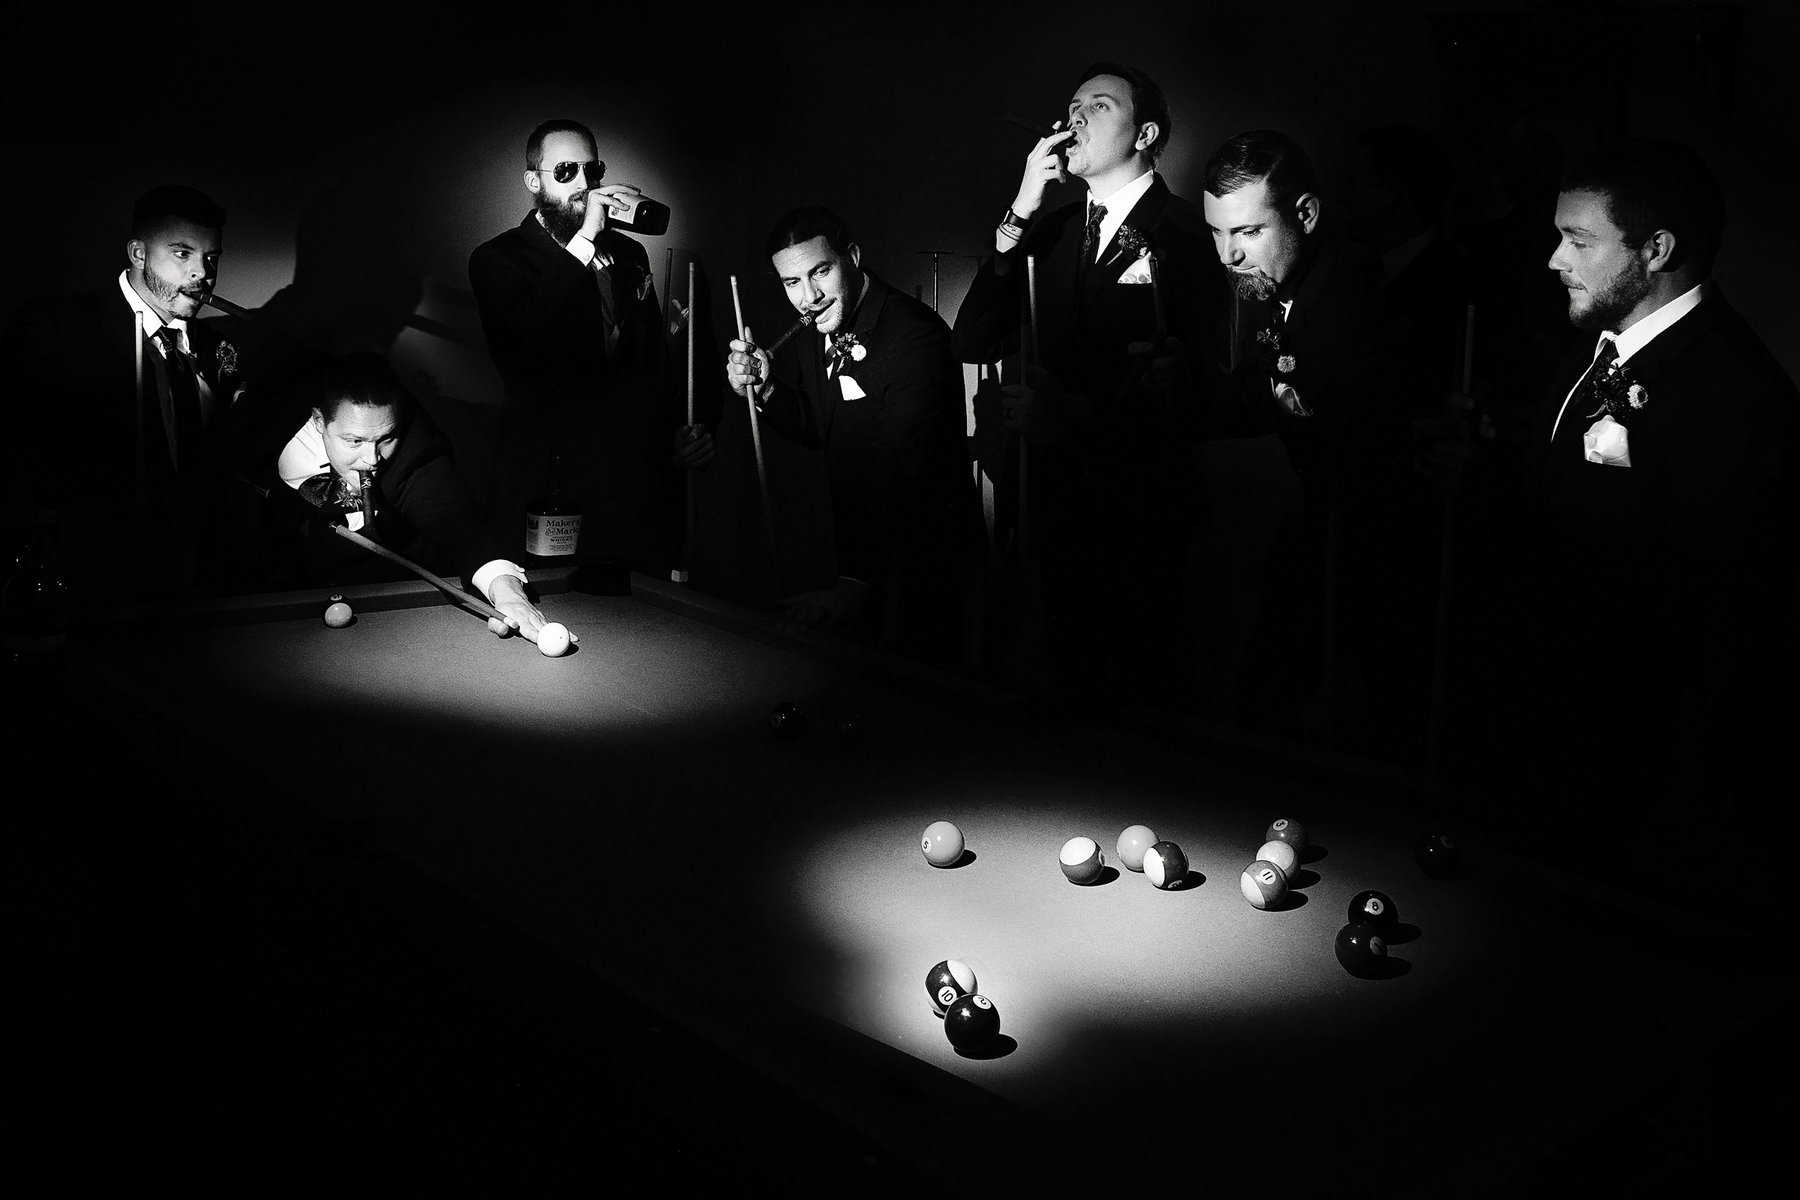 A black and white photo of a group of men playing pool.